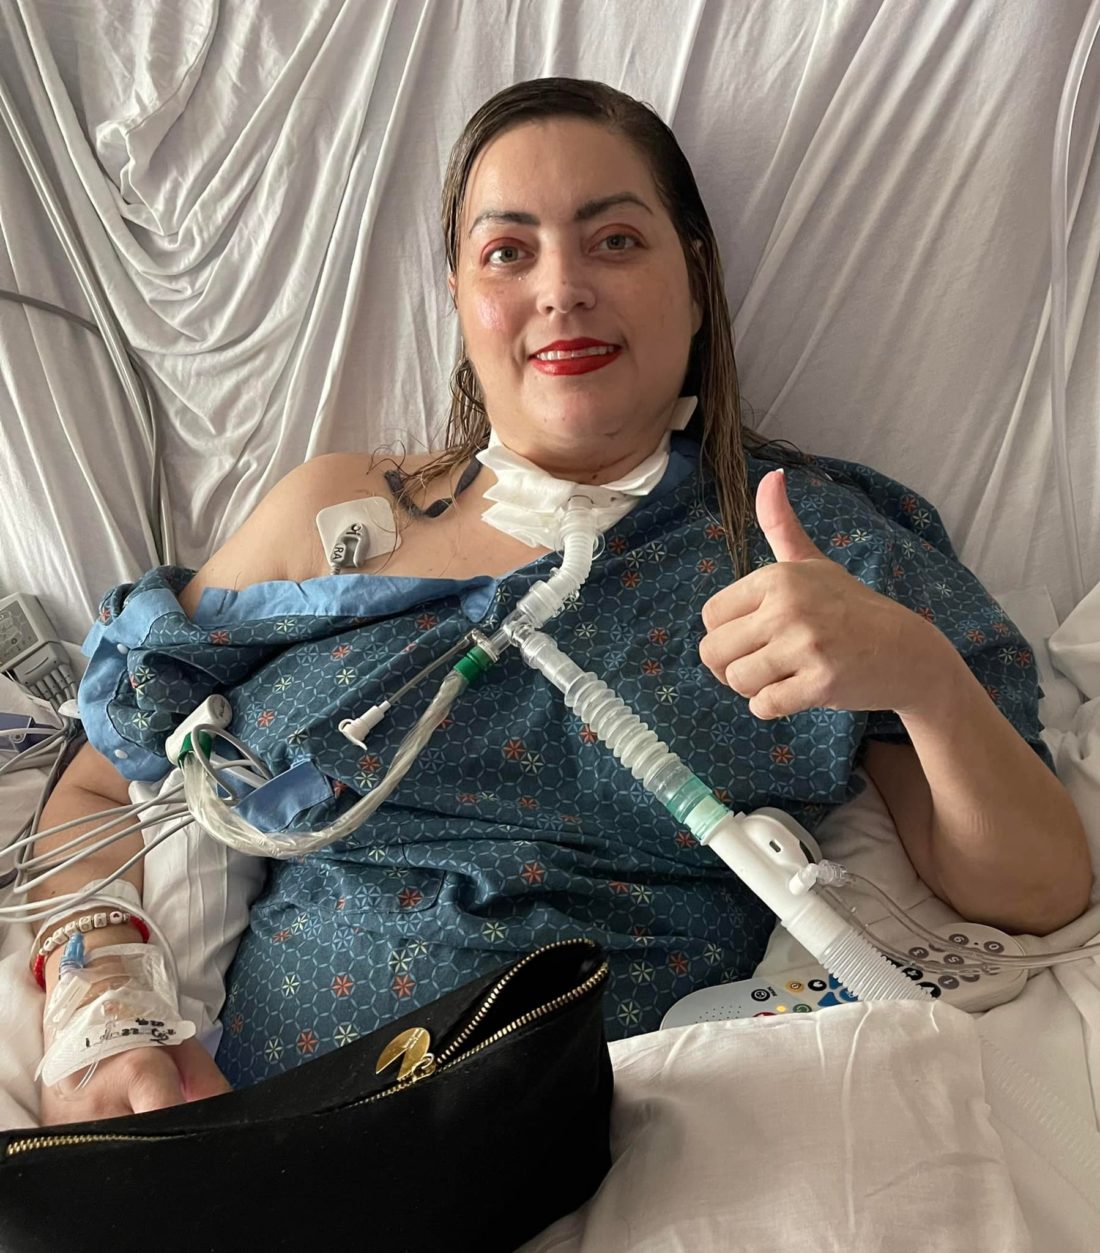 A woman in a hospital bed giving a thumbs up sign